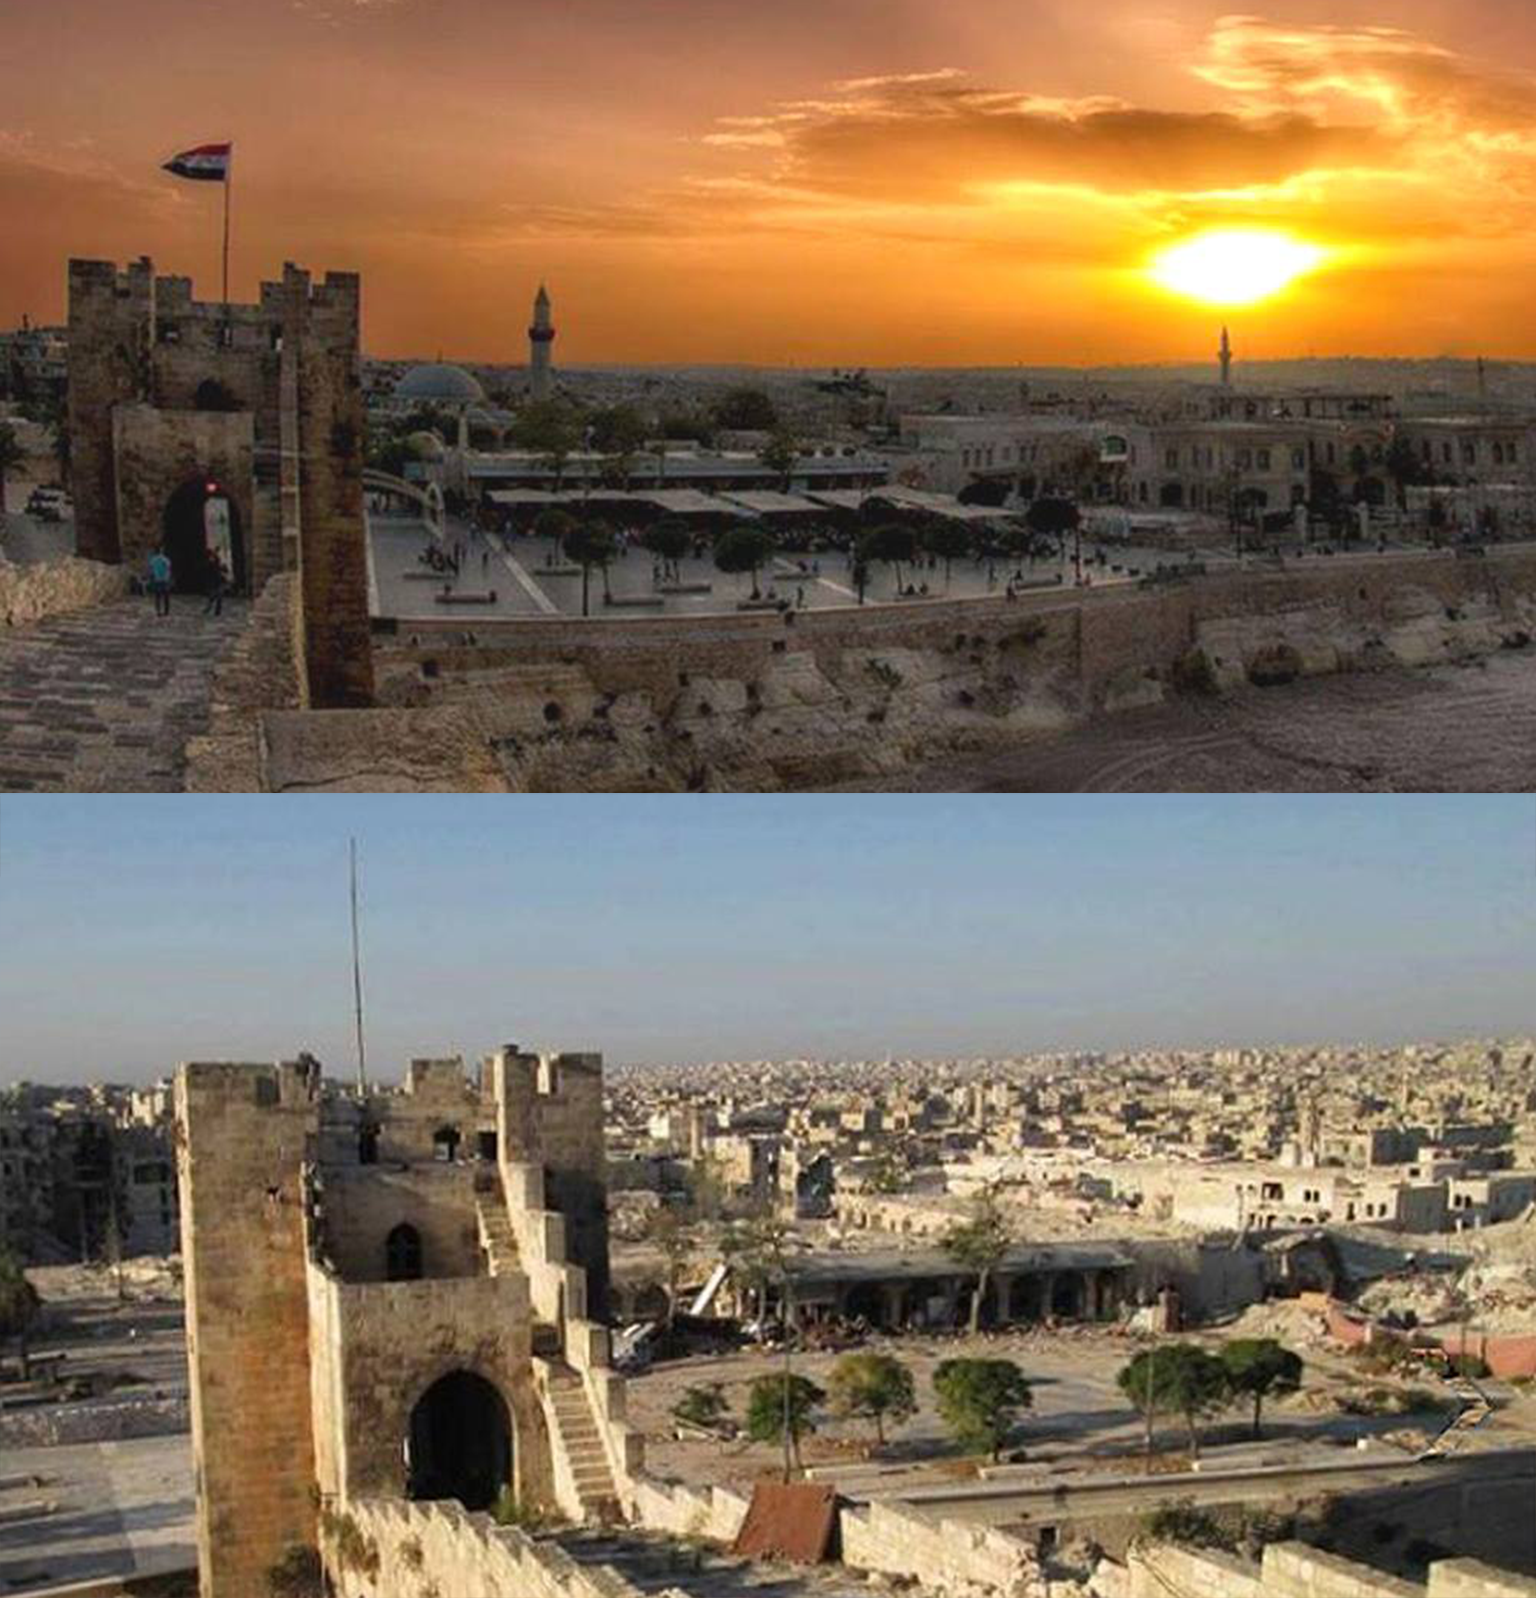 A proud flag no longer flies atop Aleppo’s Citadel in the picture below – and its stunning view has been transformed into a glimpse of the destruction that lies beyond the historic building